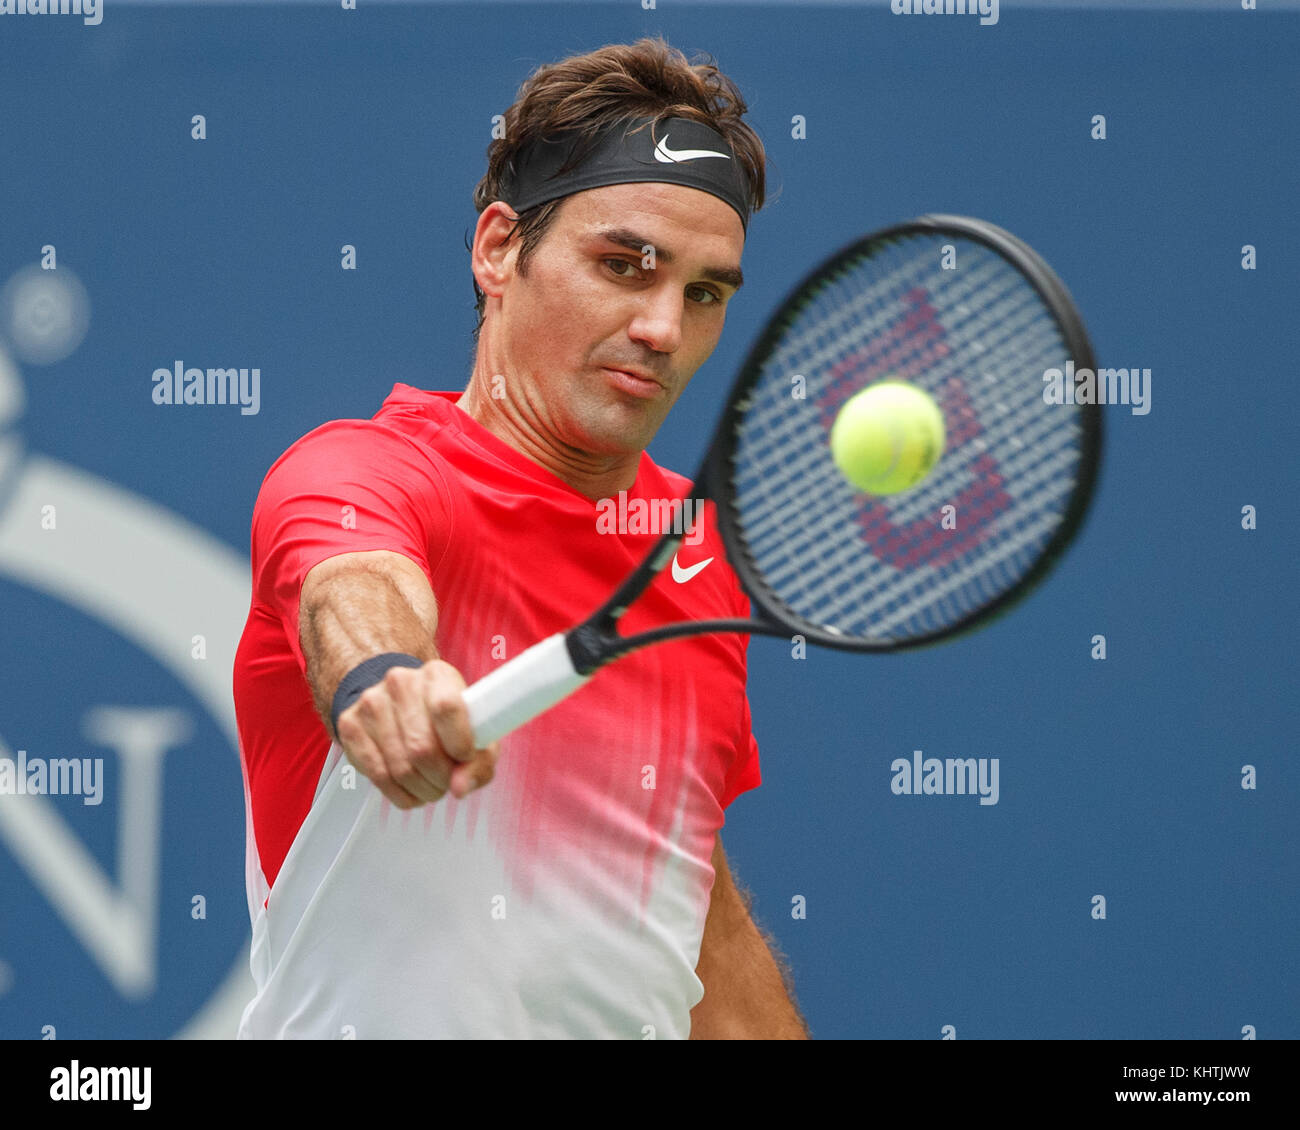 Swiss tennis player ROGER FEDERER (SUI) plays backhand shot during men's singles match at US Open 2017 Tennis Championship, New York City, New York St Stock Photo